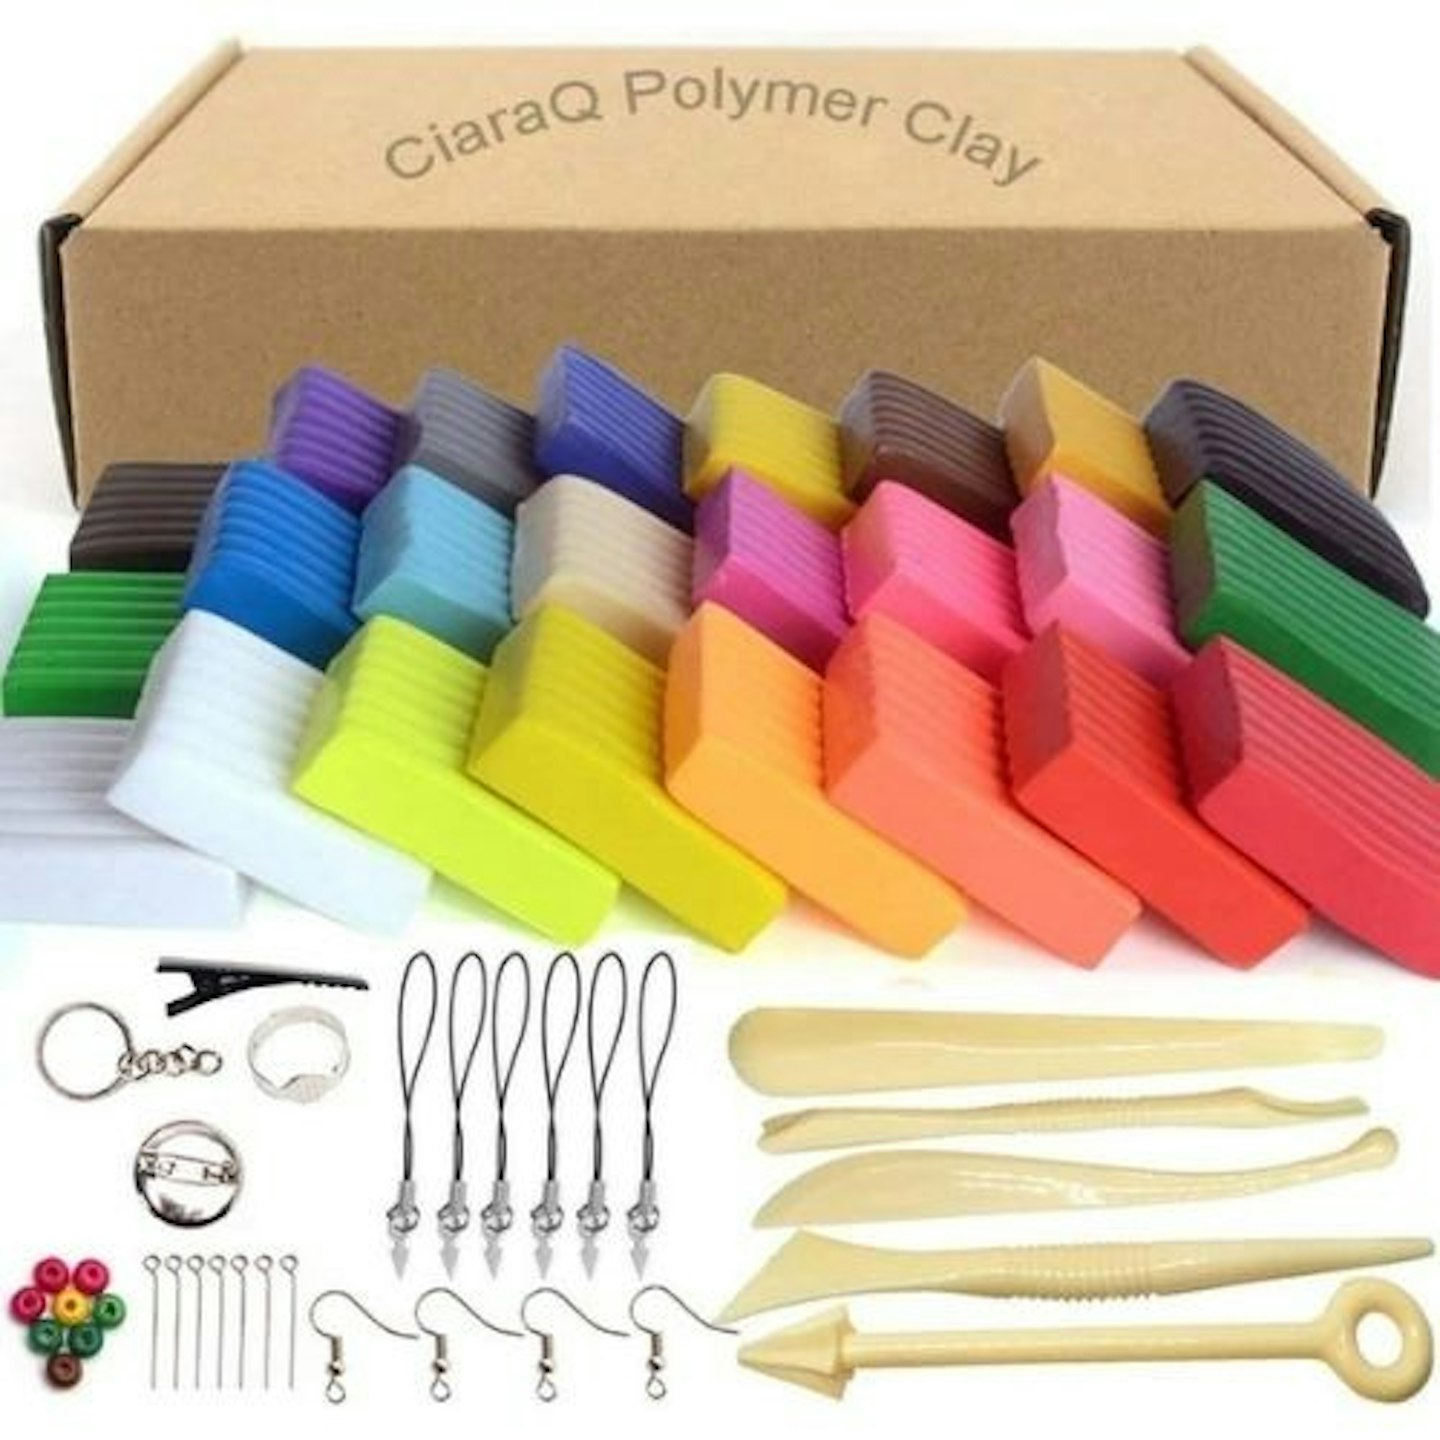 CiaraQ Polymer Clay, 24 Colors Oven Bake Clay